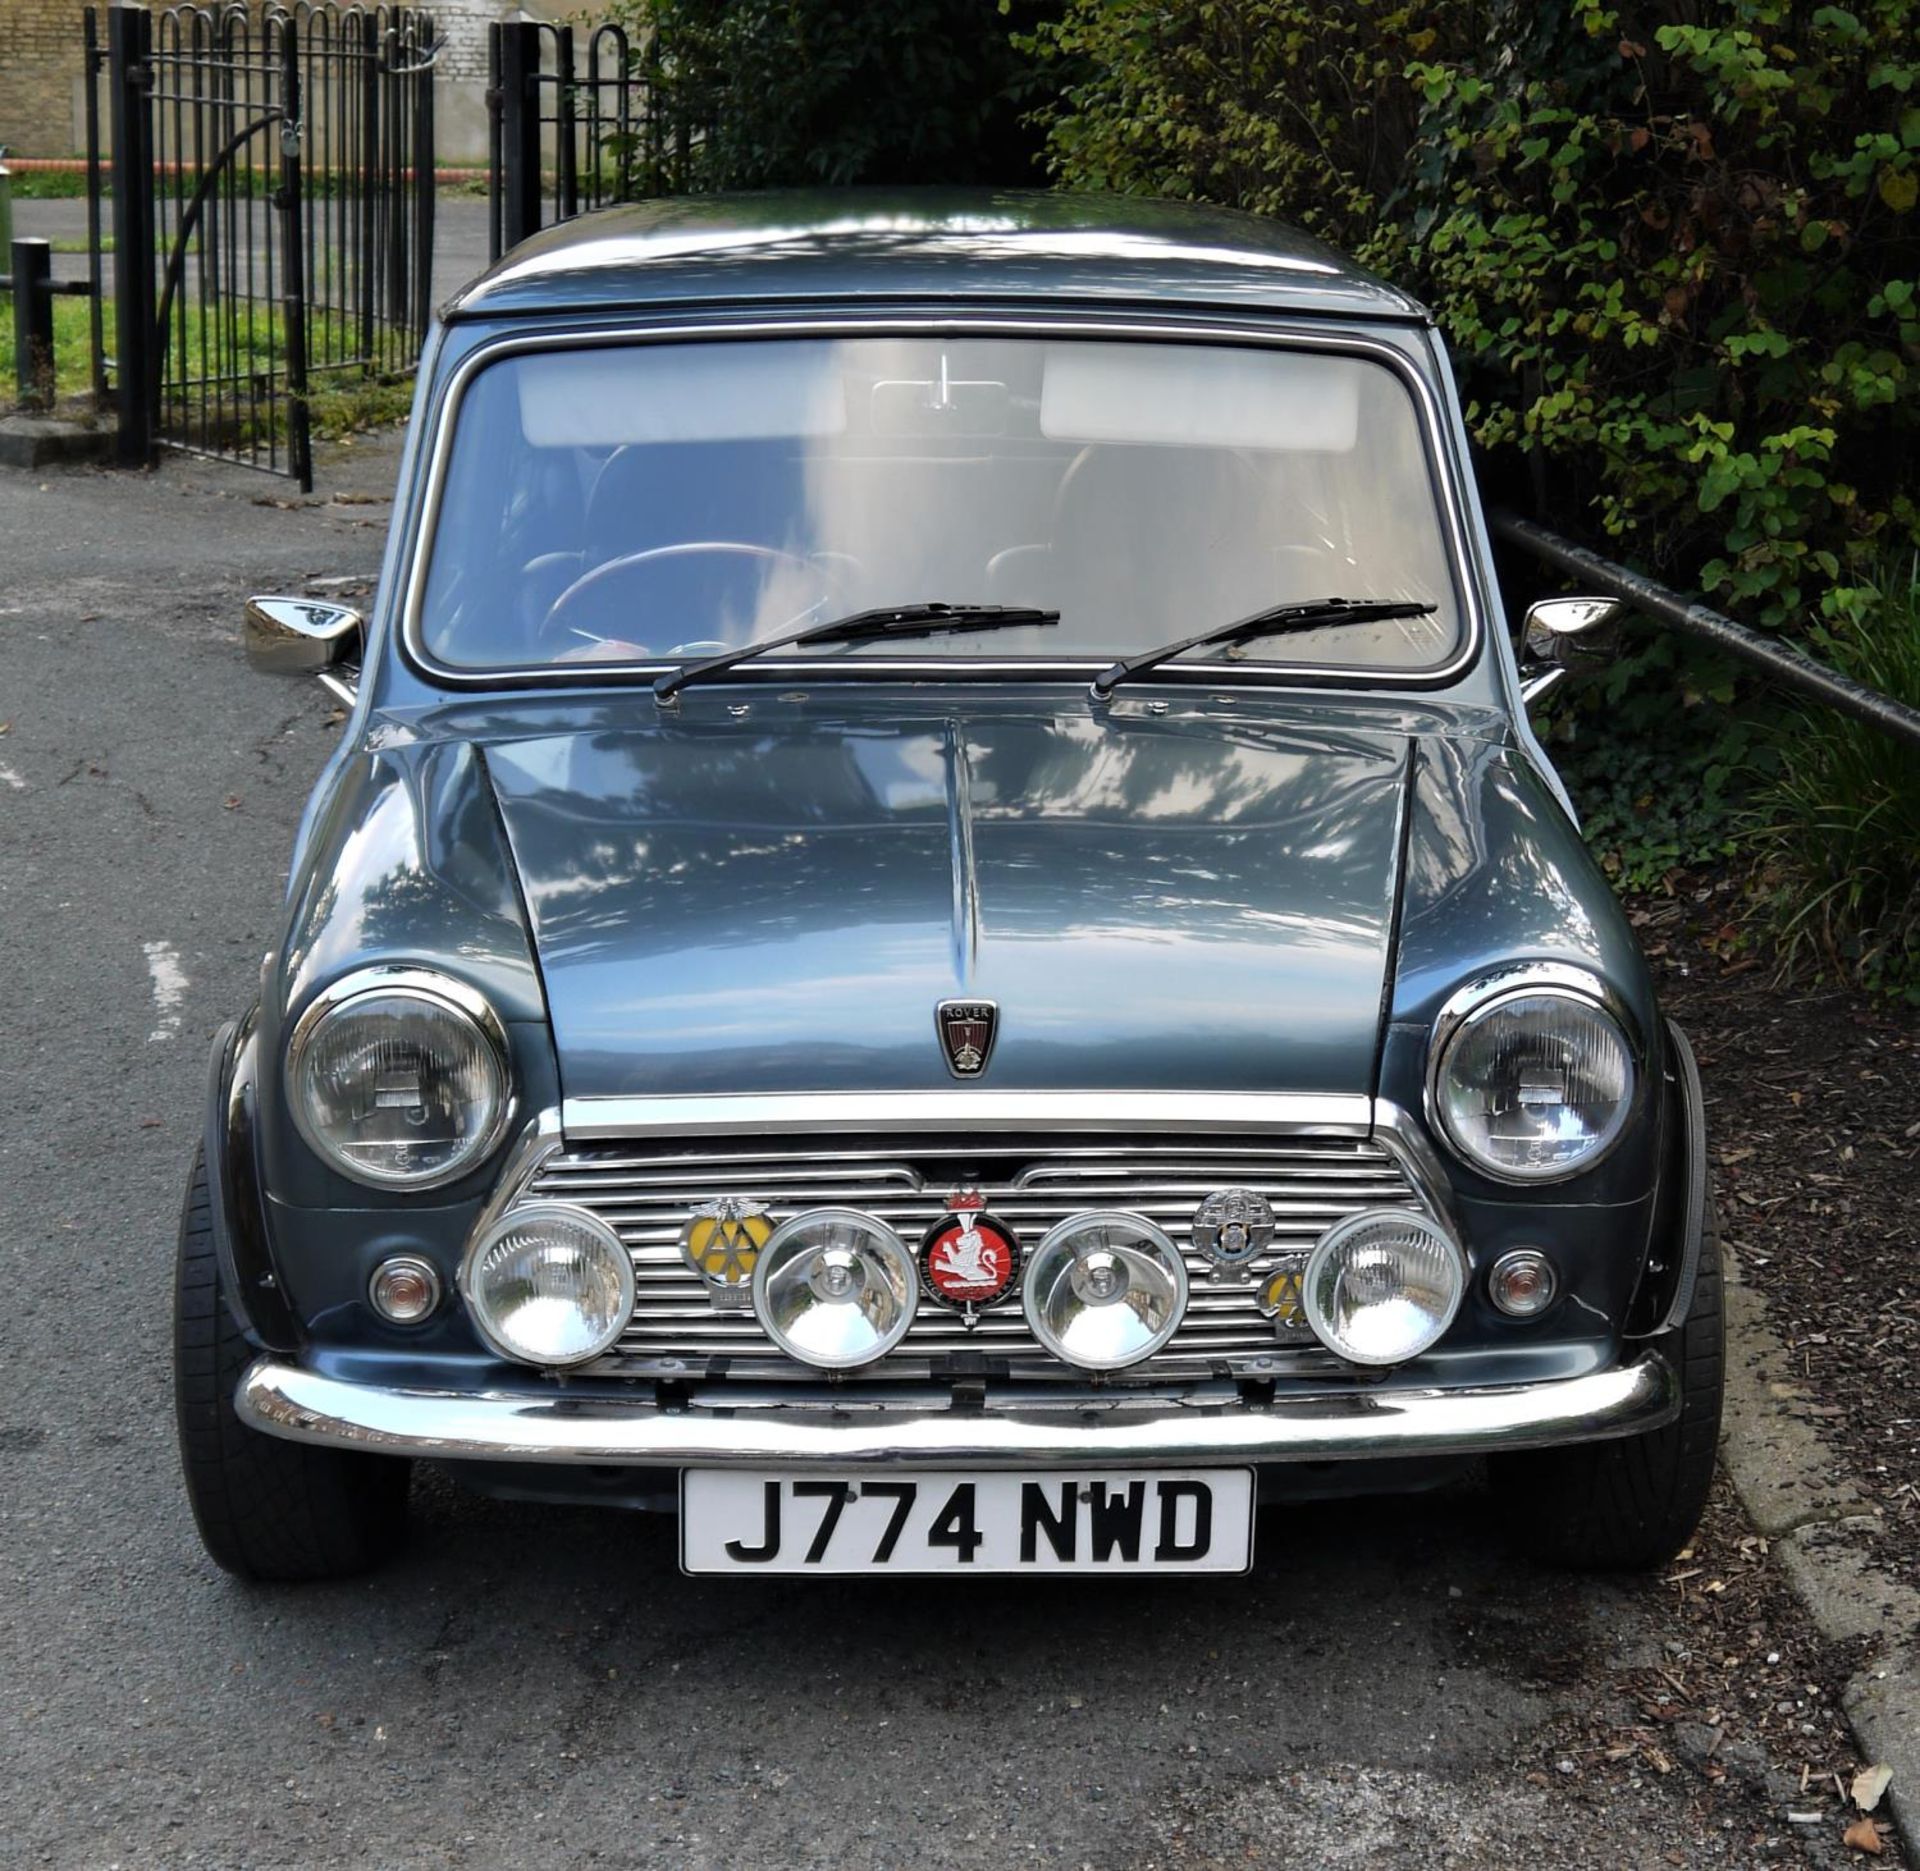 1991 ROVER MINI NEON Registration Number: J774 NWD Recorded Mileage: 58,000 miles Chassis Number: - Bild 4 aus 24